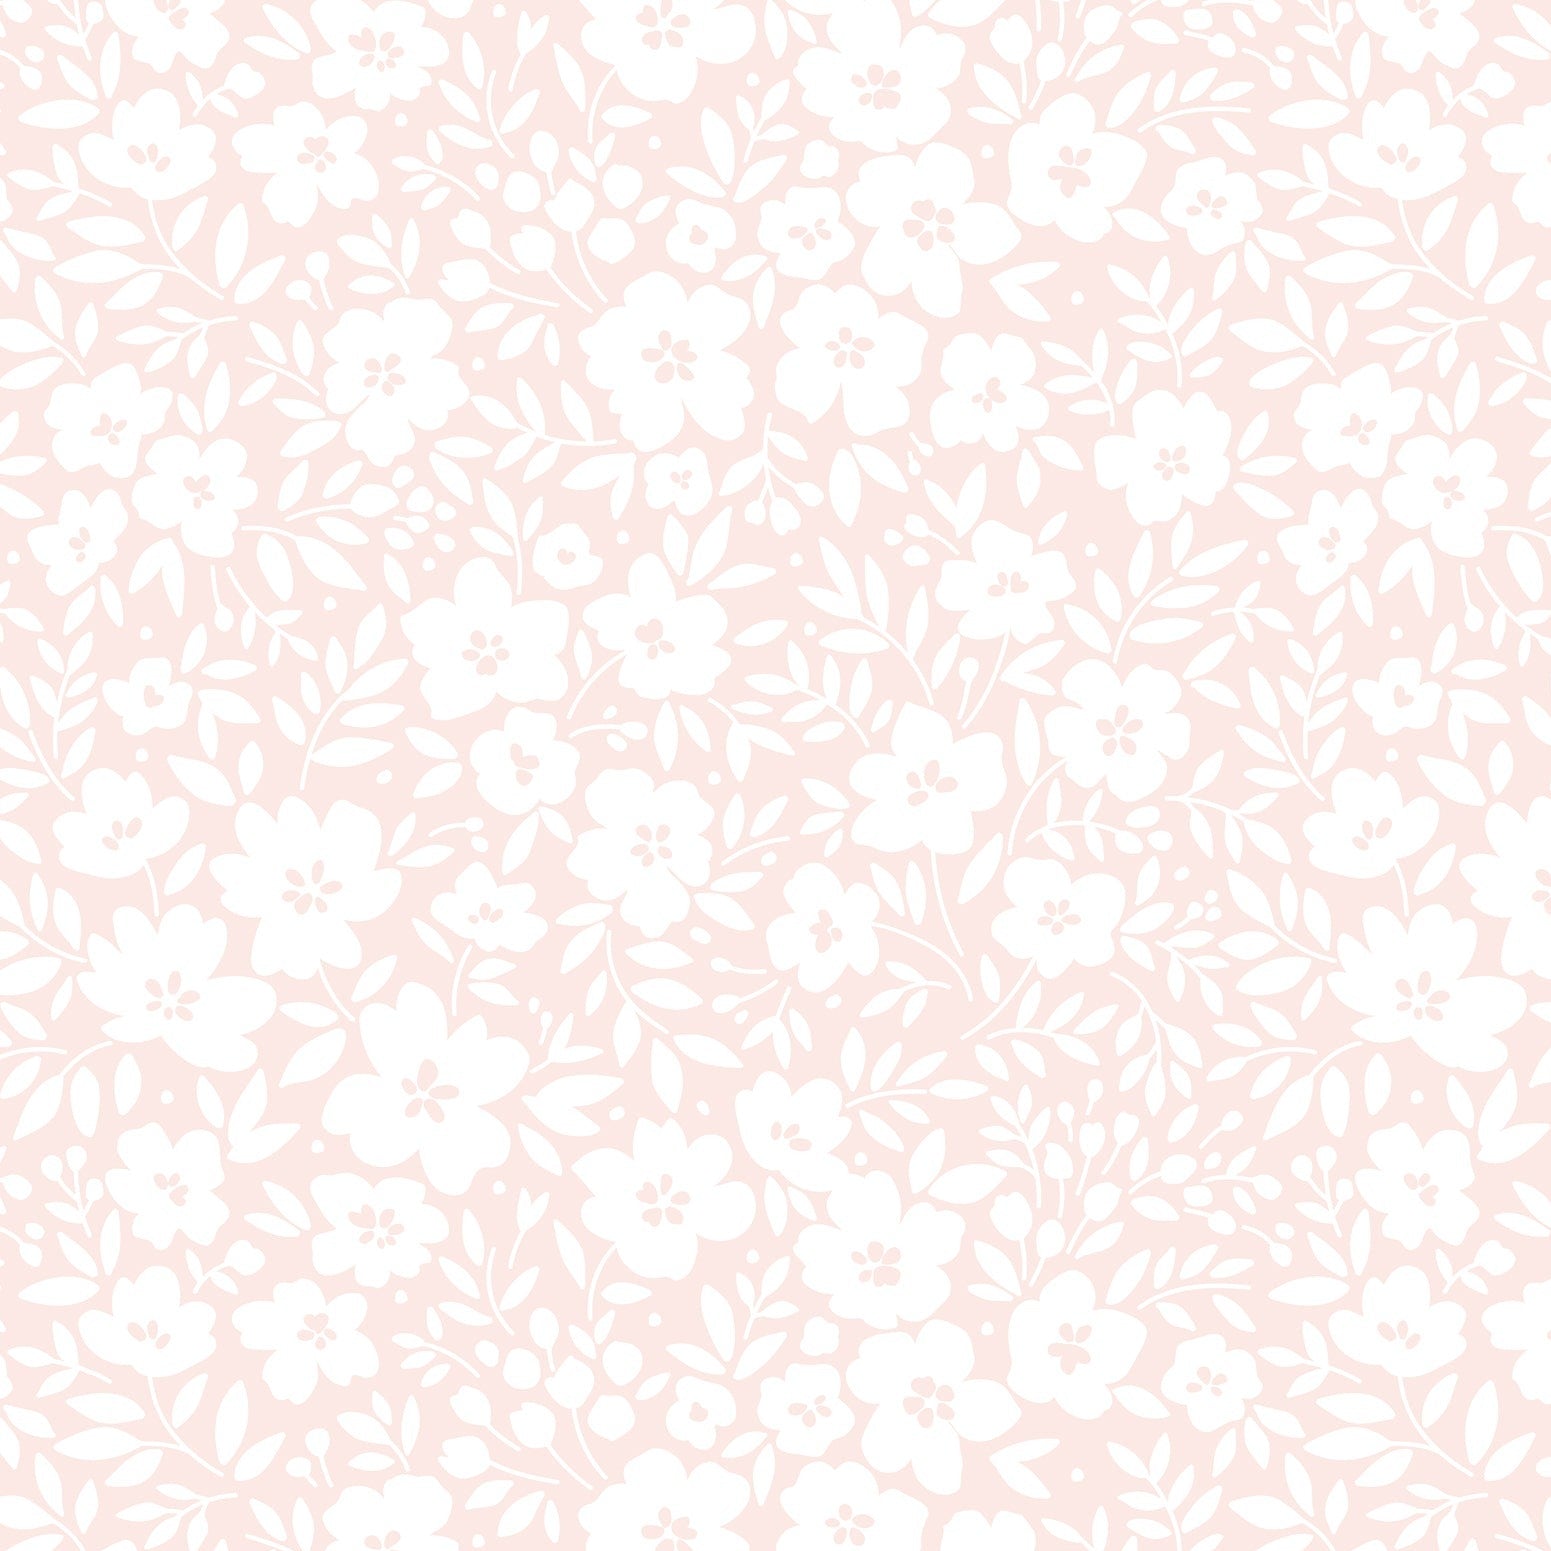 Close-up view of the Flower Power Wallpaper showcasing a dense floral design in soft pink hues. The intricate pattern of small flowers and leaves provides a gentle and cheerful background, perfect for adding a touch of nature to any room.